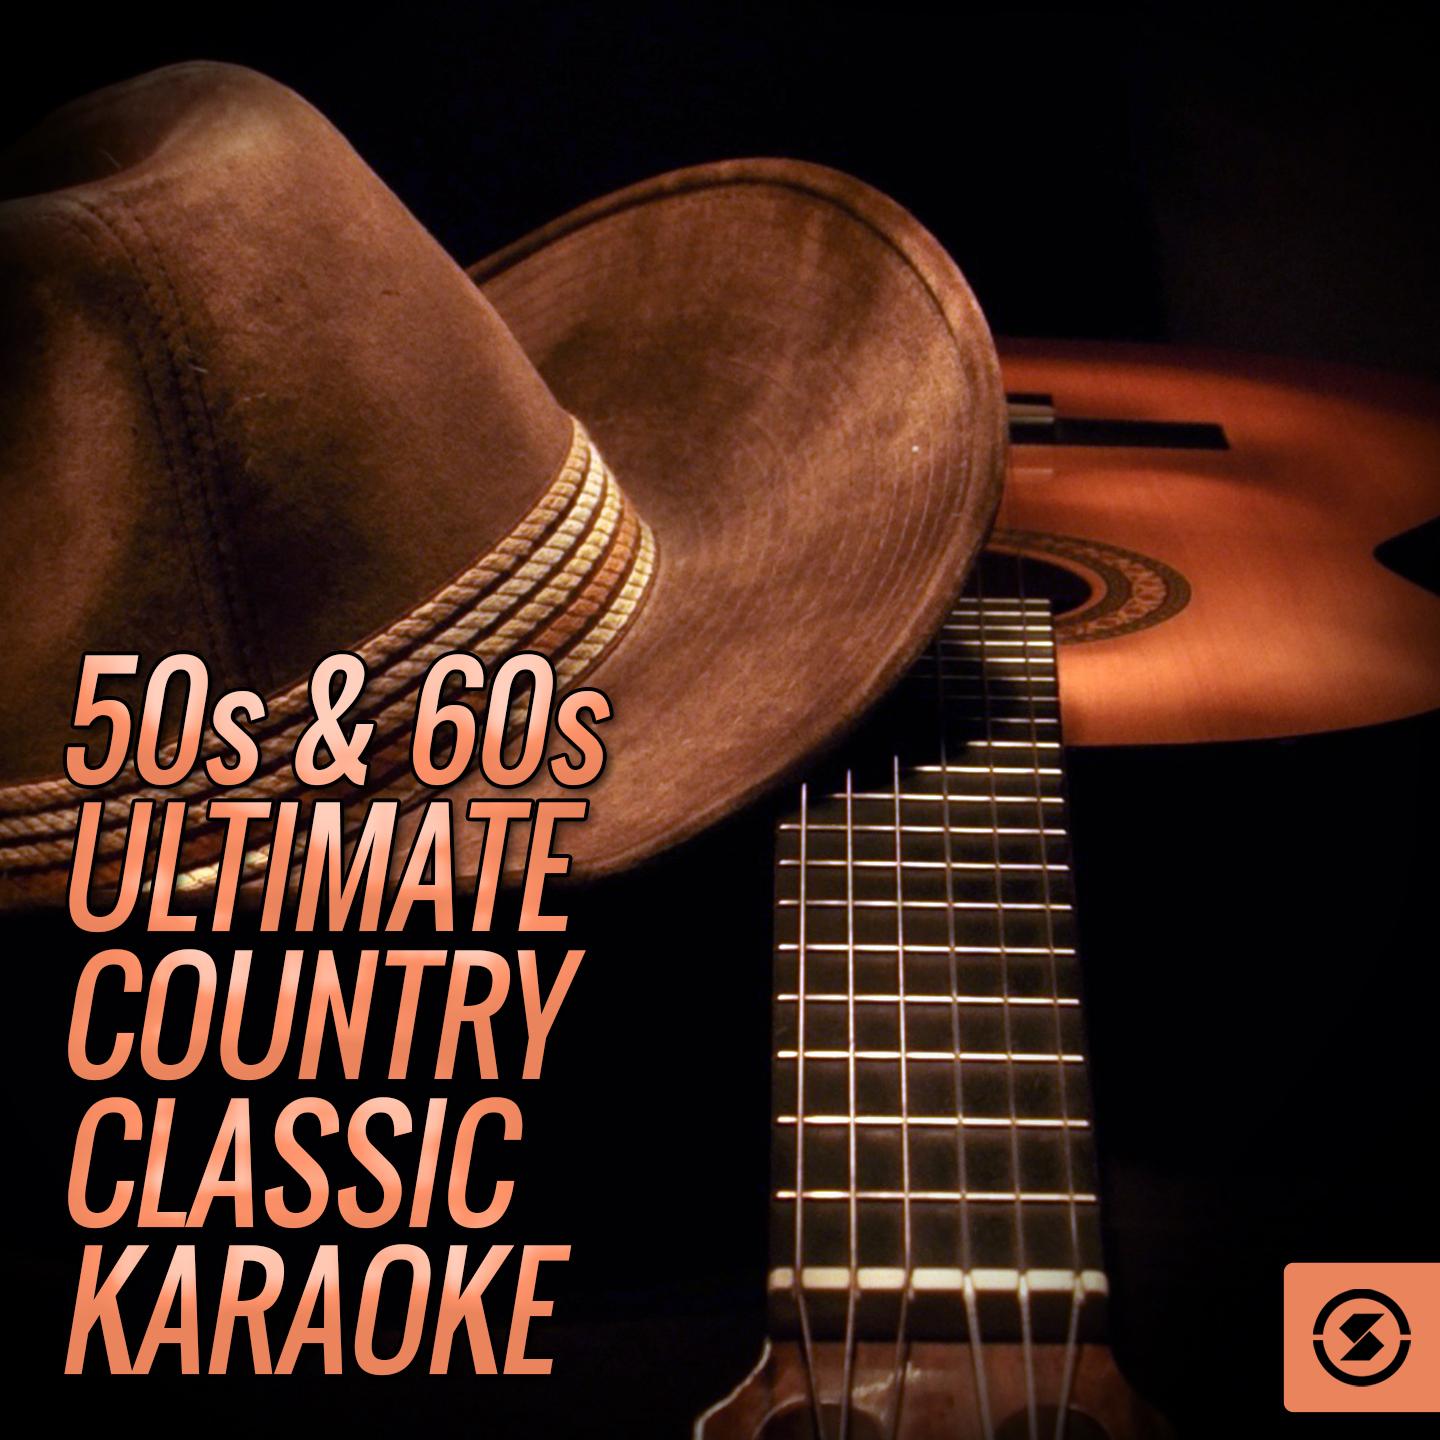 50s & 60s Ultimate Country Classic Karaoke